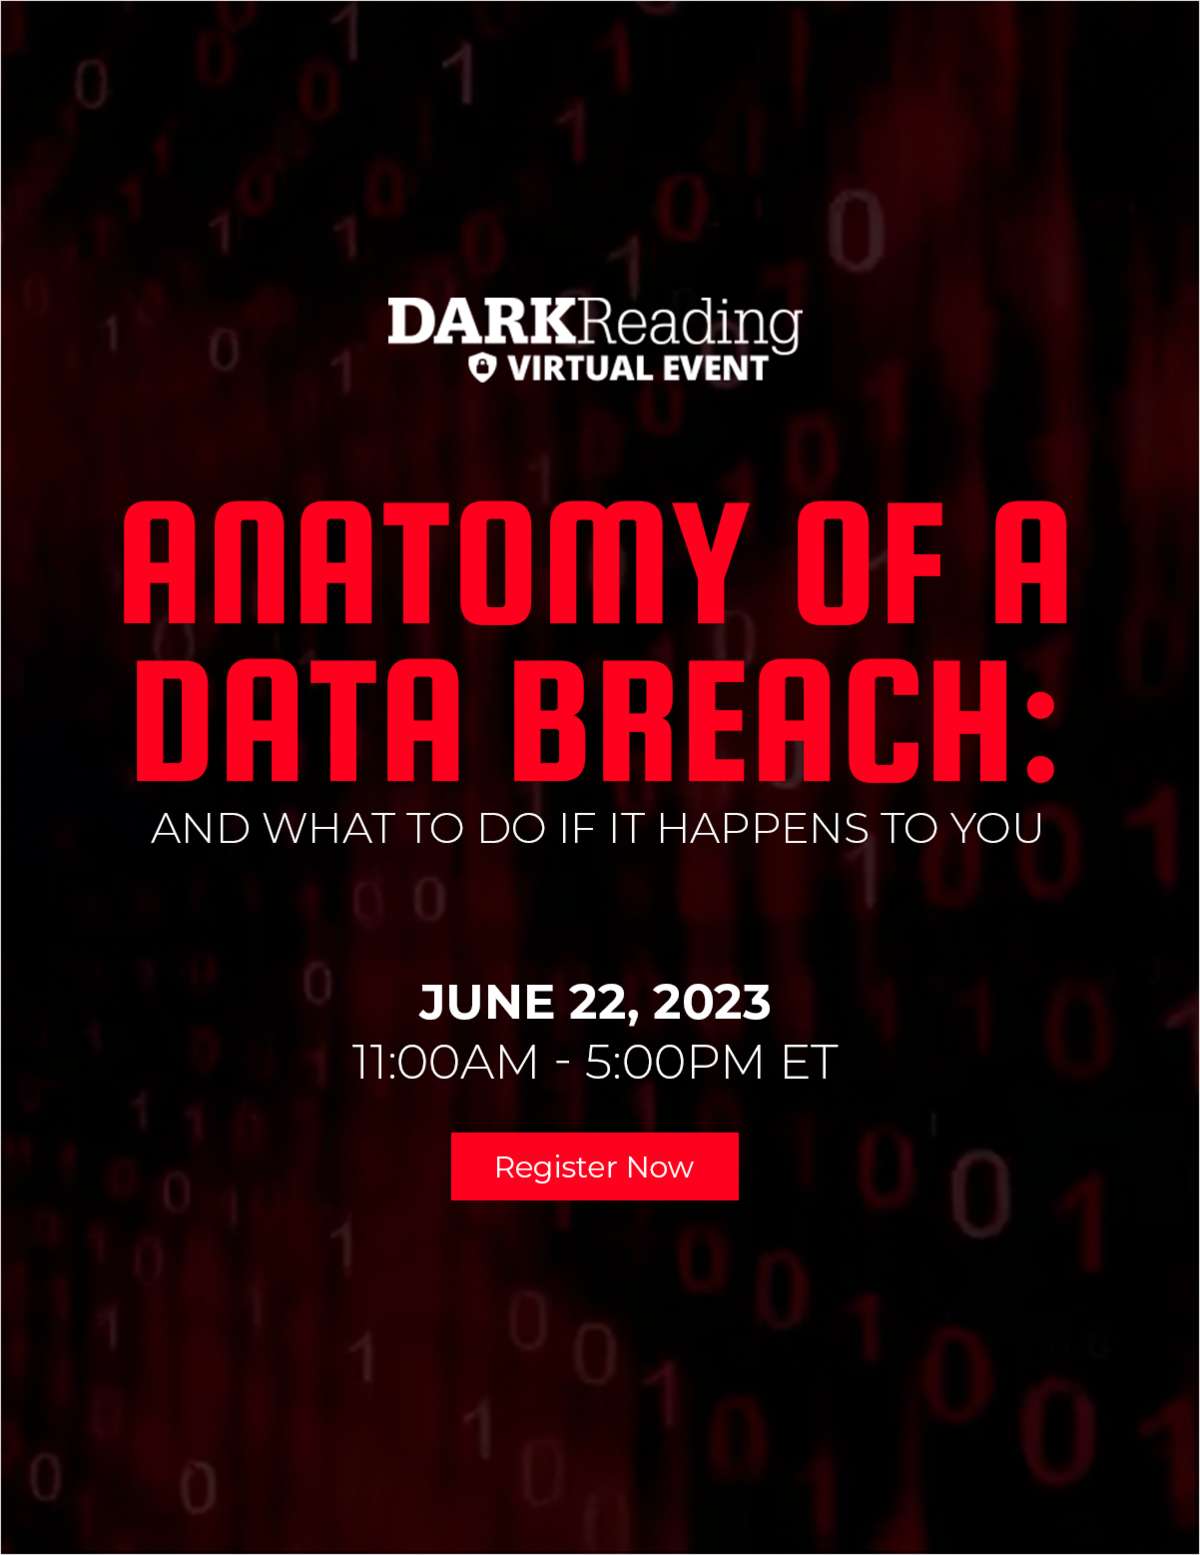 Anatomy of a Data Breach: and what to do if it happens to you